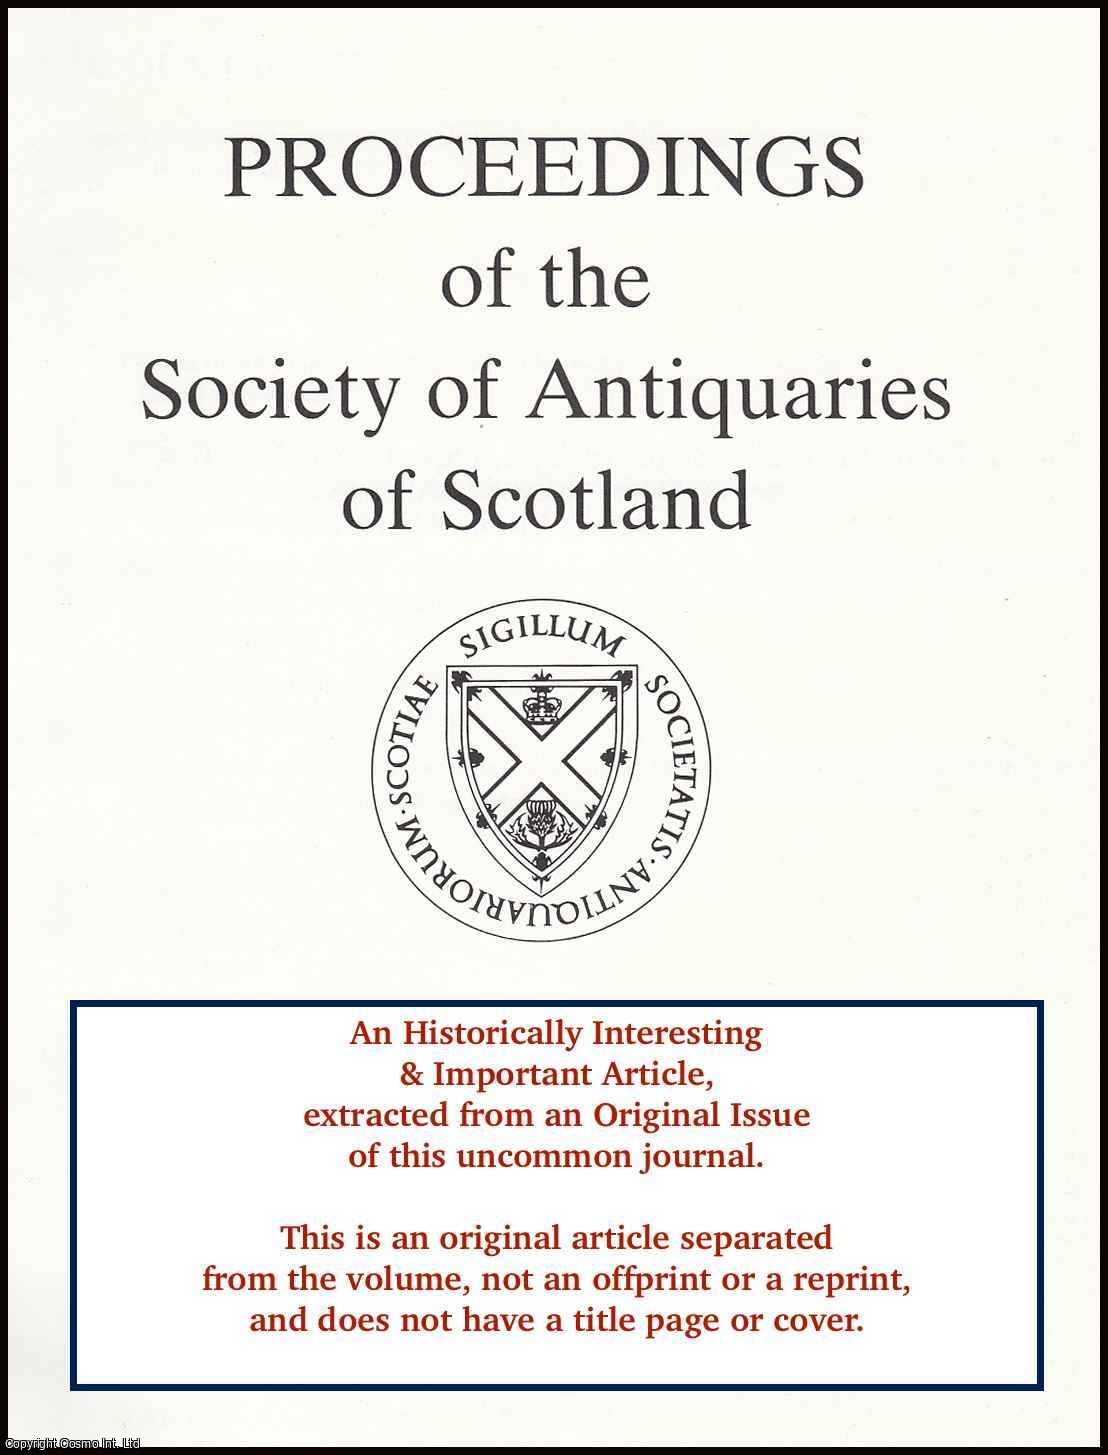 Trevor Cowie - A Survey of The Neolithic Pottery of Eastern and Central Scotland. An original article from the Proceedings of the Society of Antiquaries of Scotland, 1993.